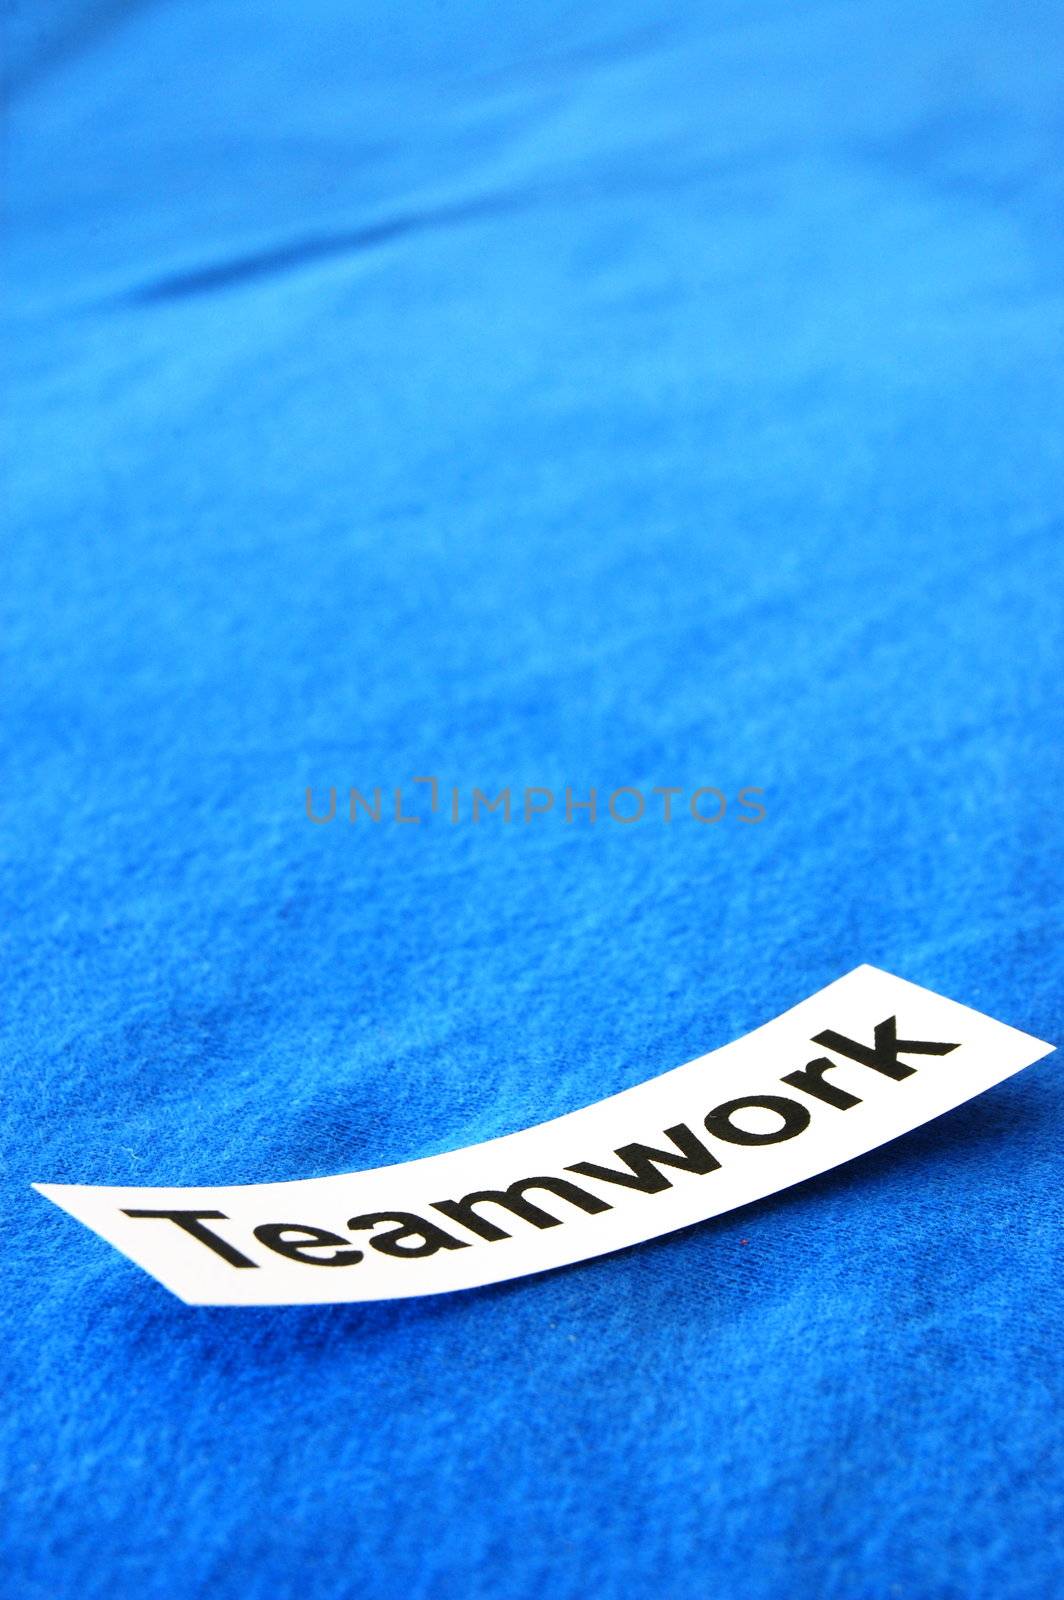 team or teamwork concept with blank space for text